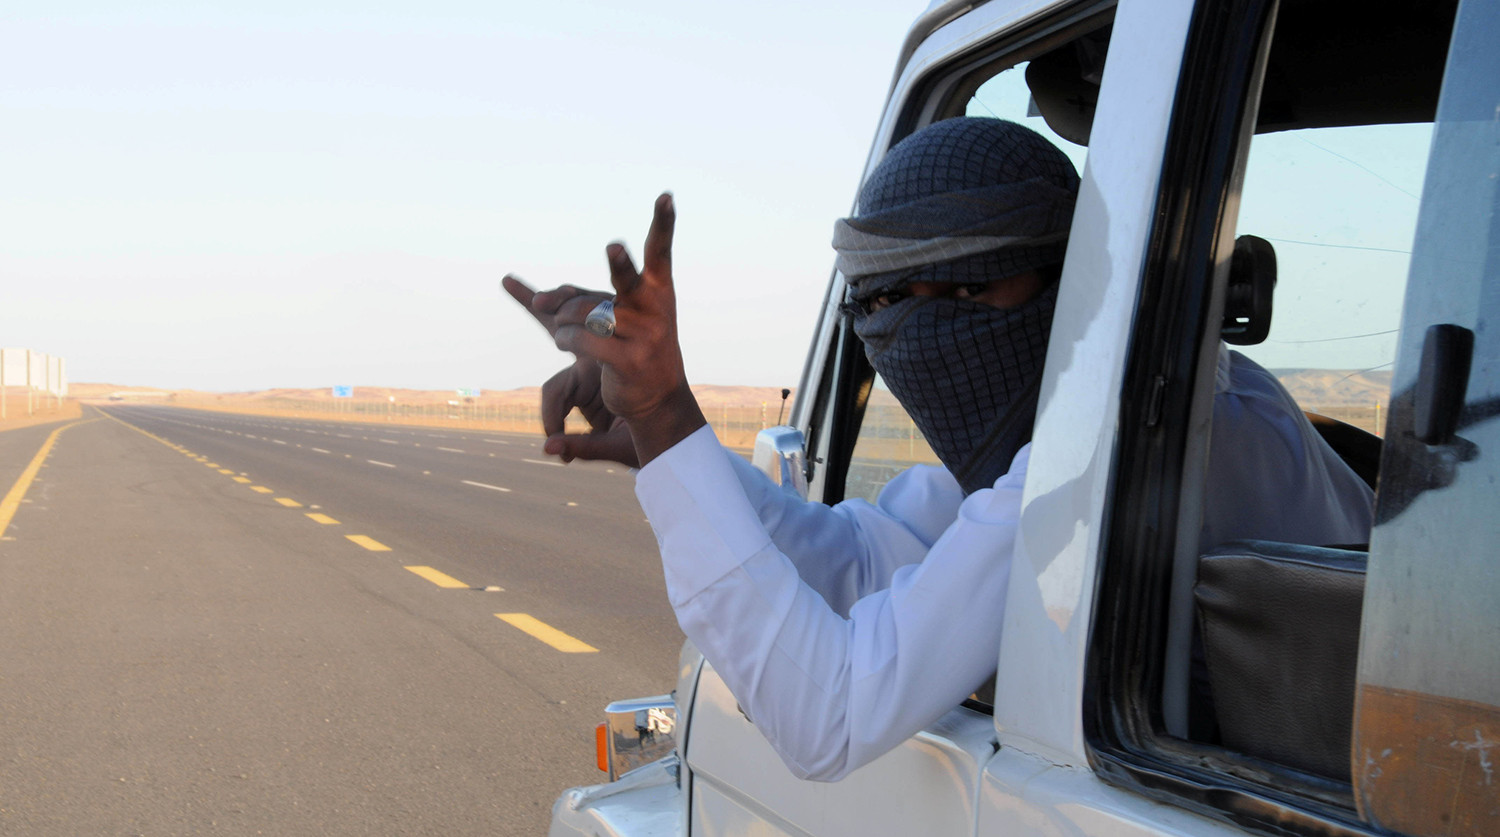 Saudi man who performs a stunt known as "sidewall skiing" gestures from his vehicle in Tabuk